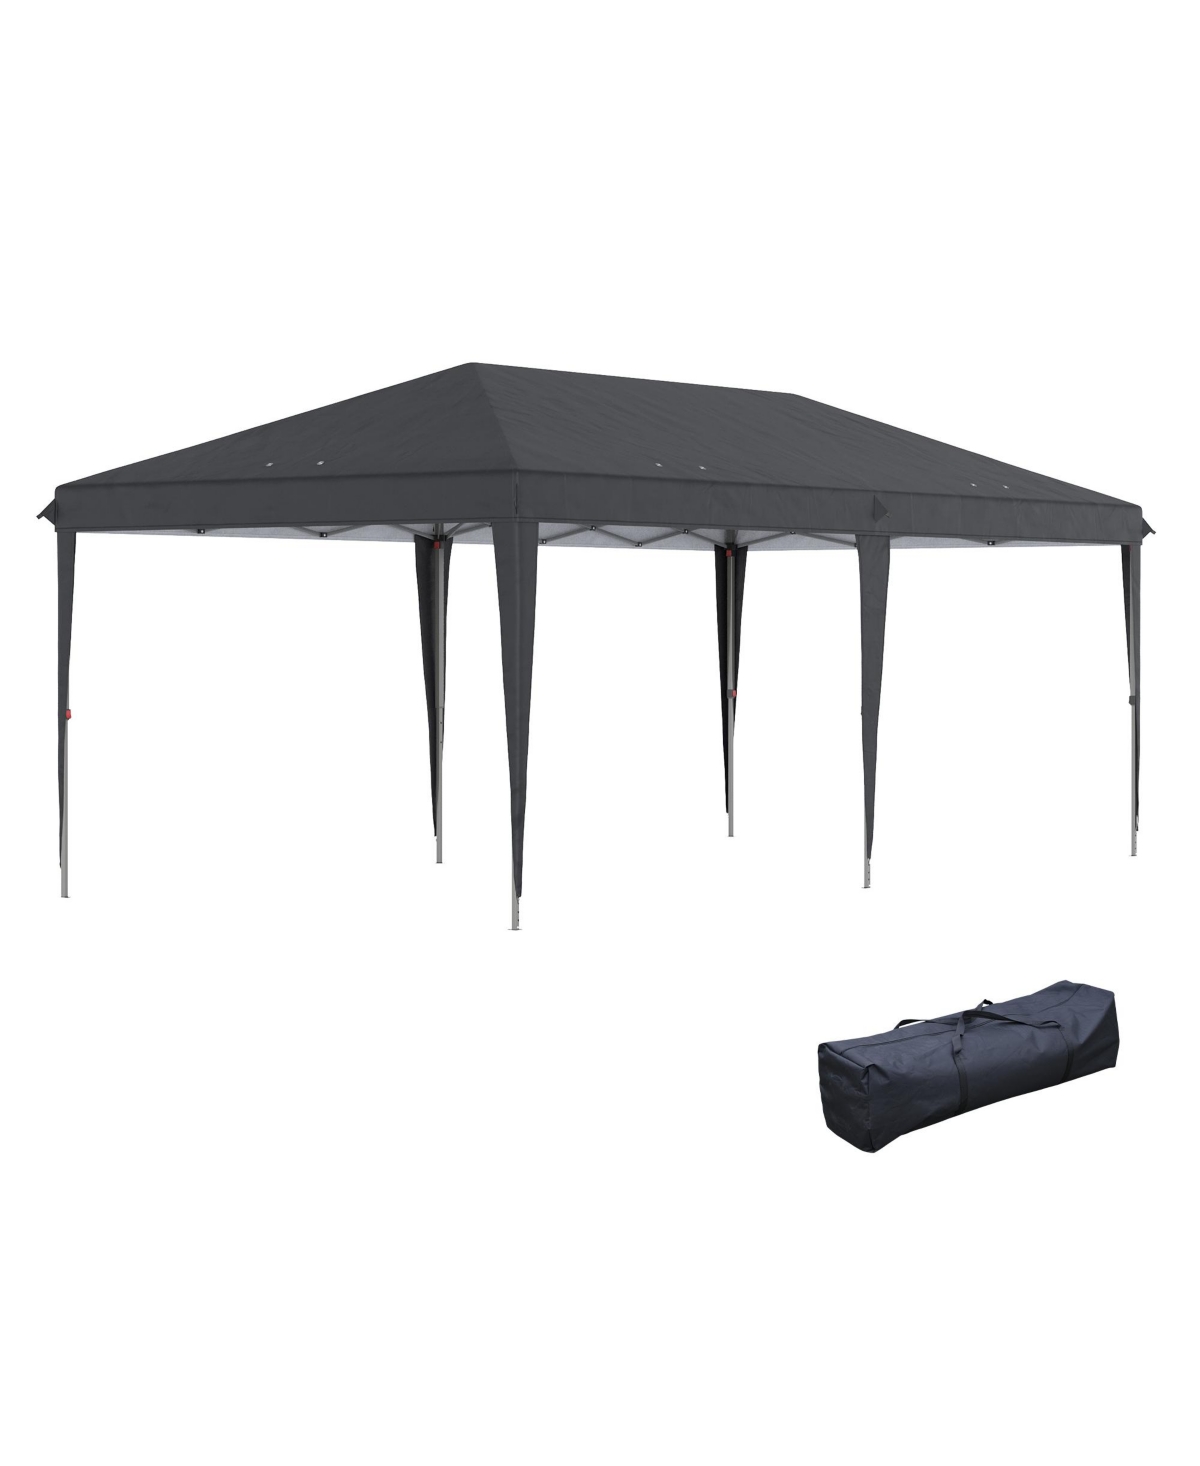 10' x 19' Extra Large Pop Up Canopy, Outdoor Party Tent with Folding Steel Frame, Carrying Bag for Catering, Events, Backyard Bbq, Black - Bl